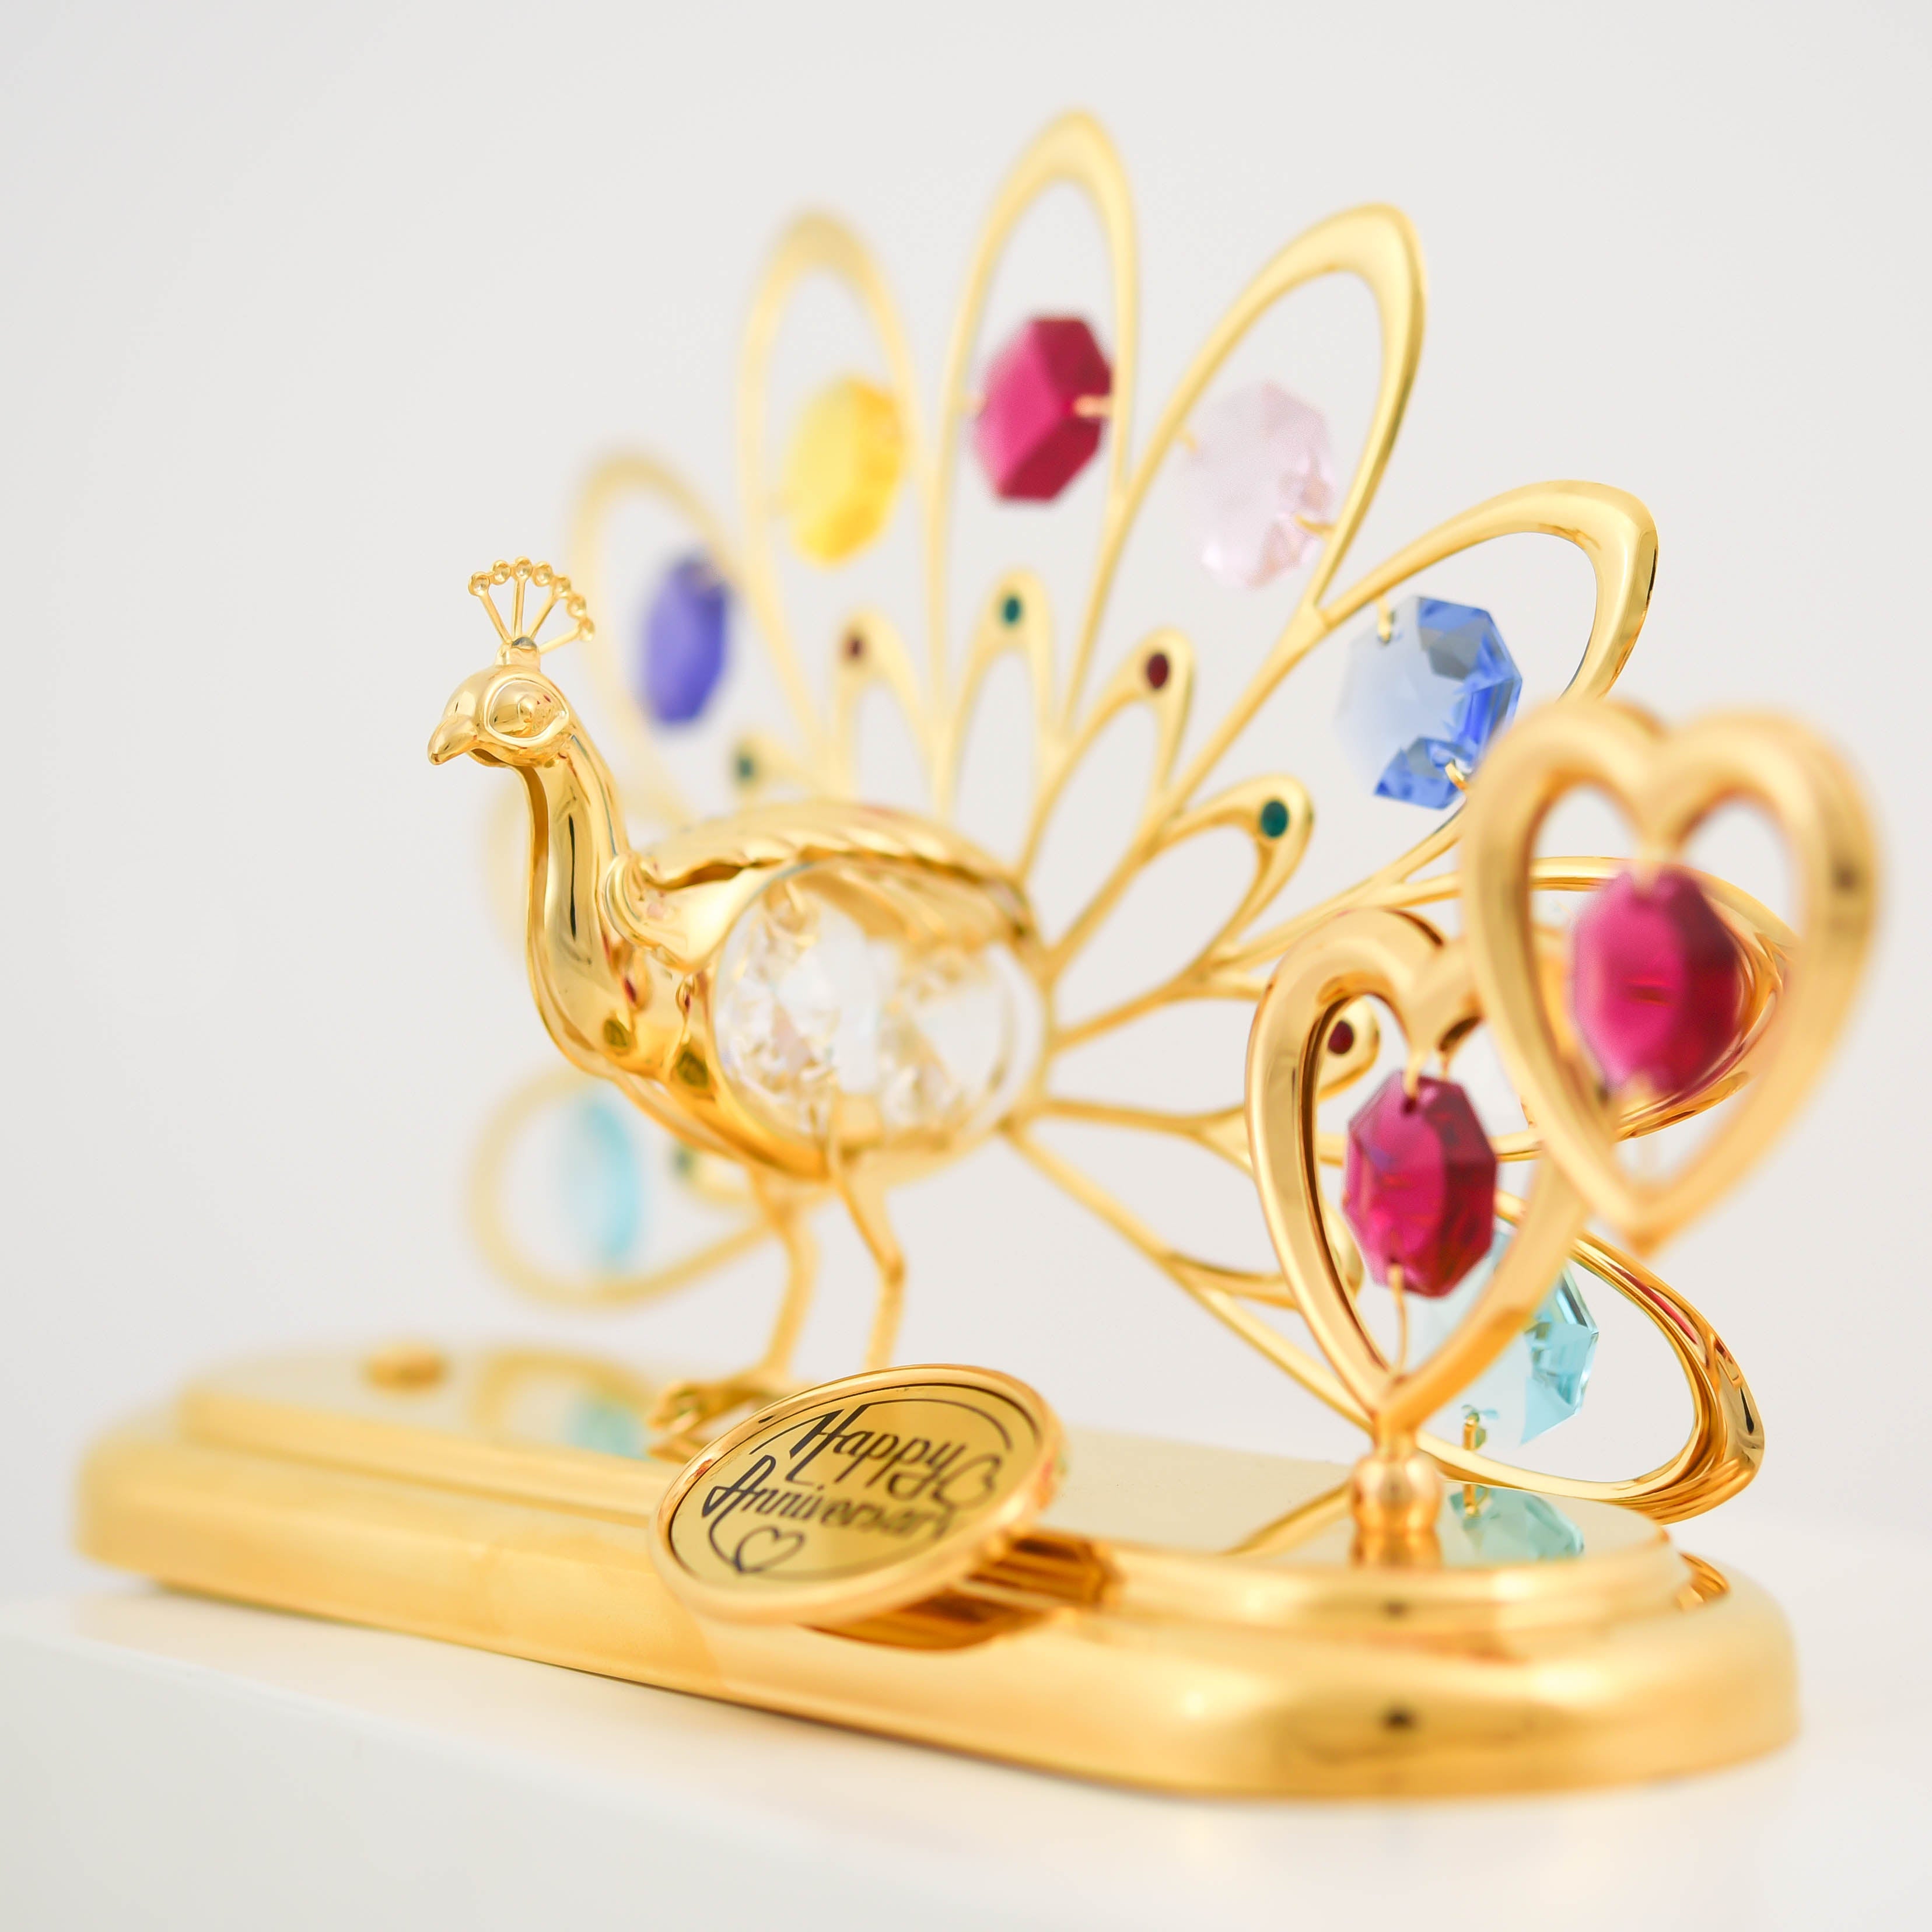 Large Peacock and Double Hearts - Custom Occasions Figurine